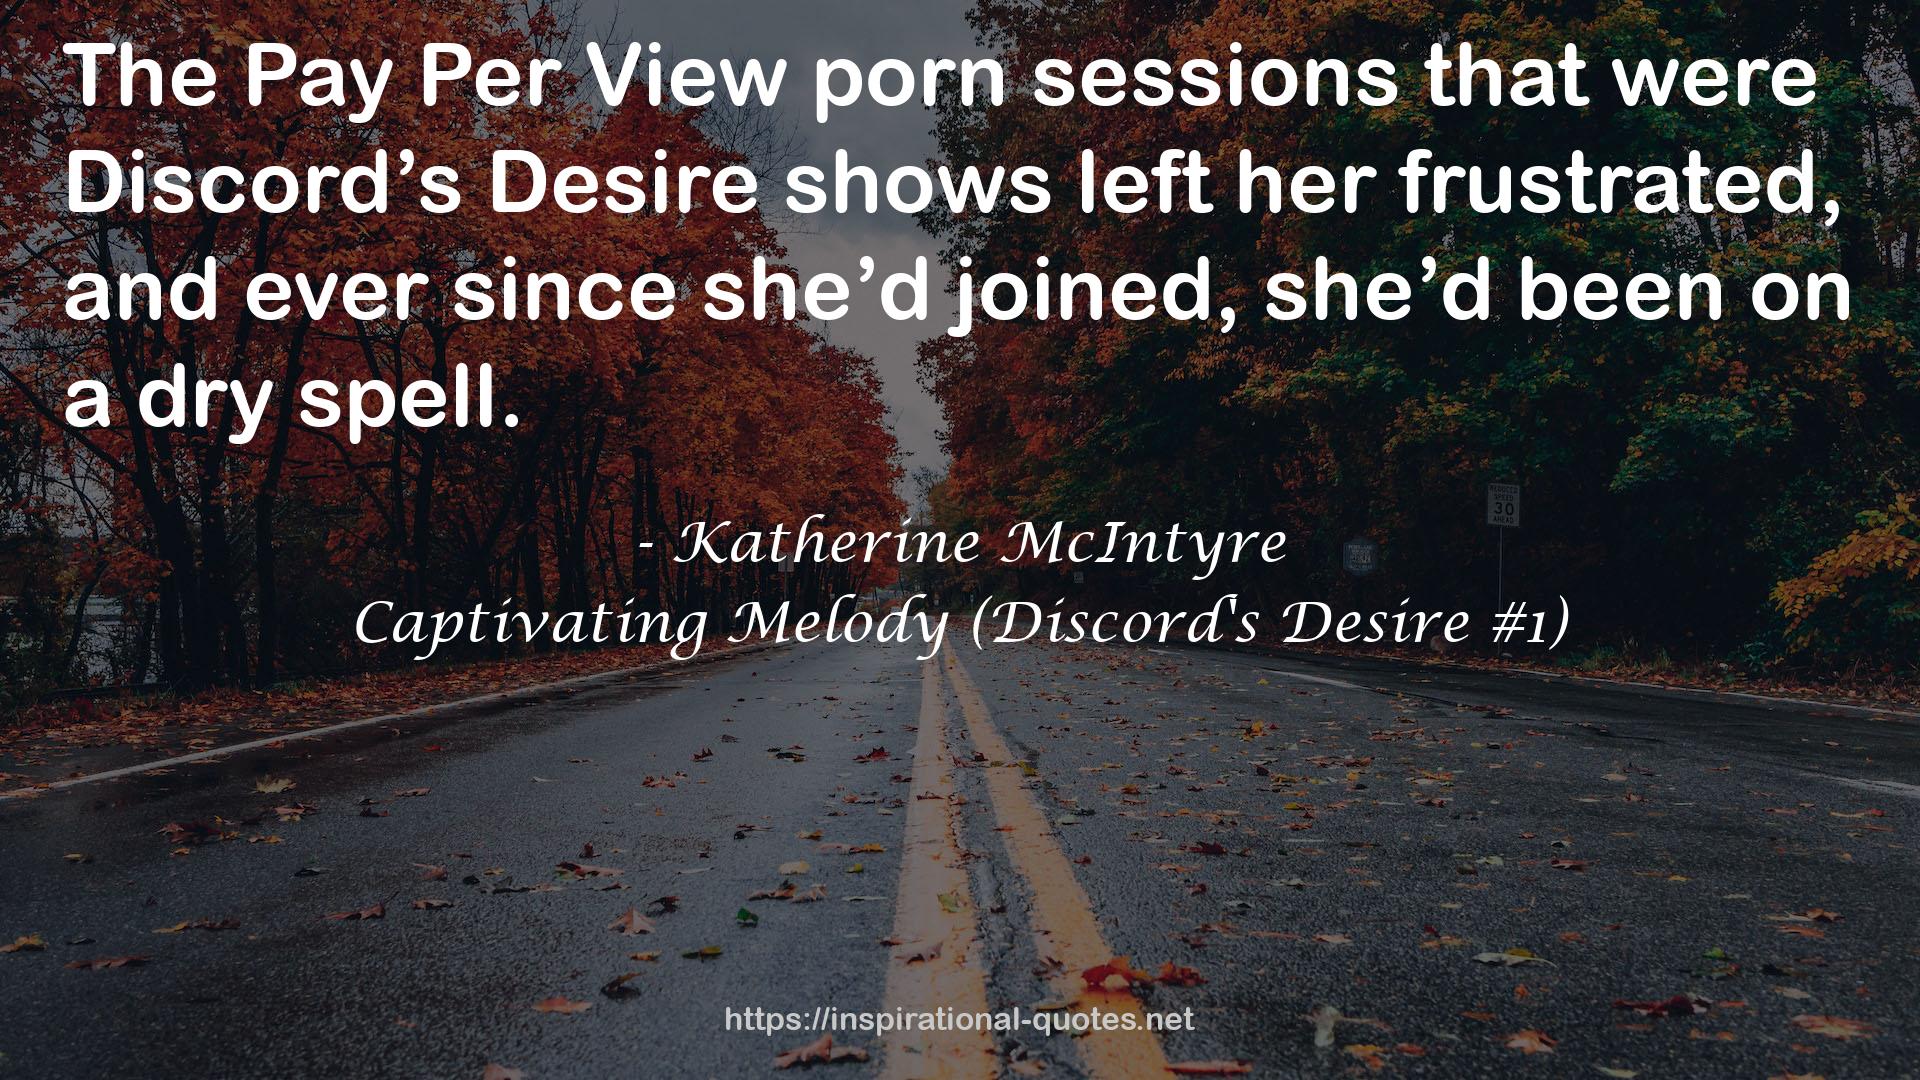 Captivating Melody (Discord's Desire #1) QUOTES